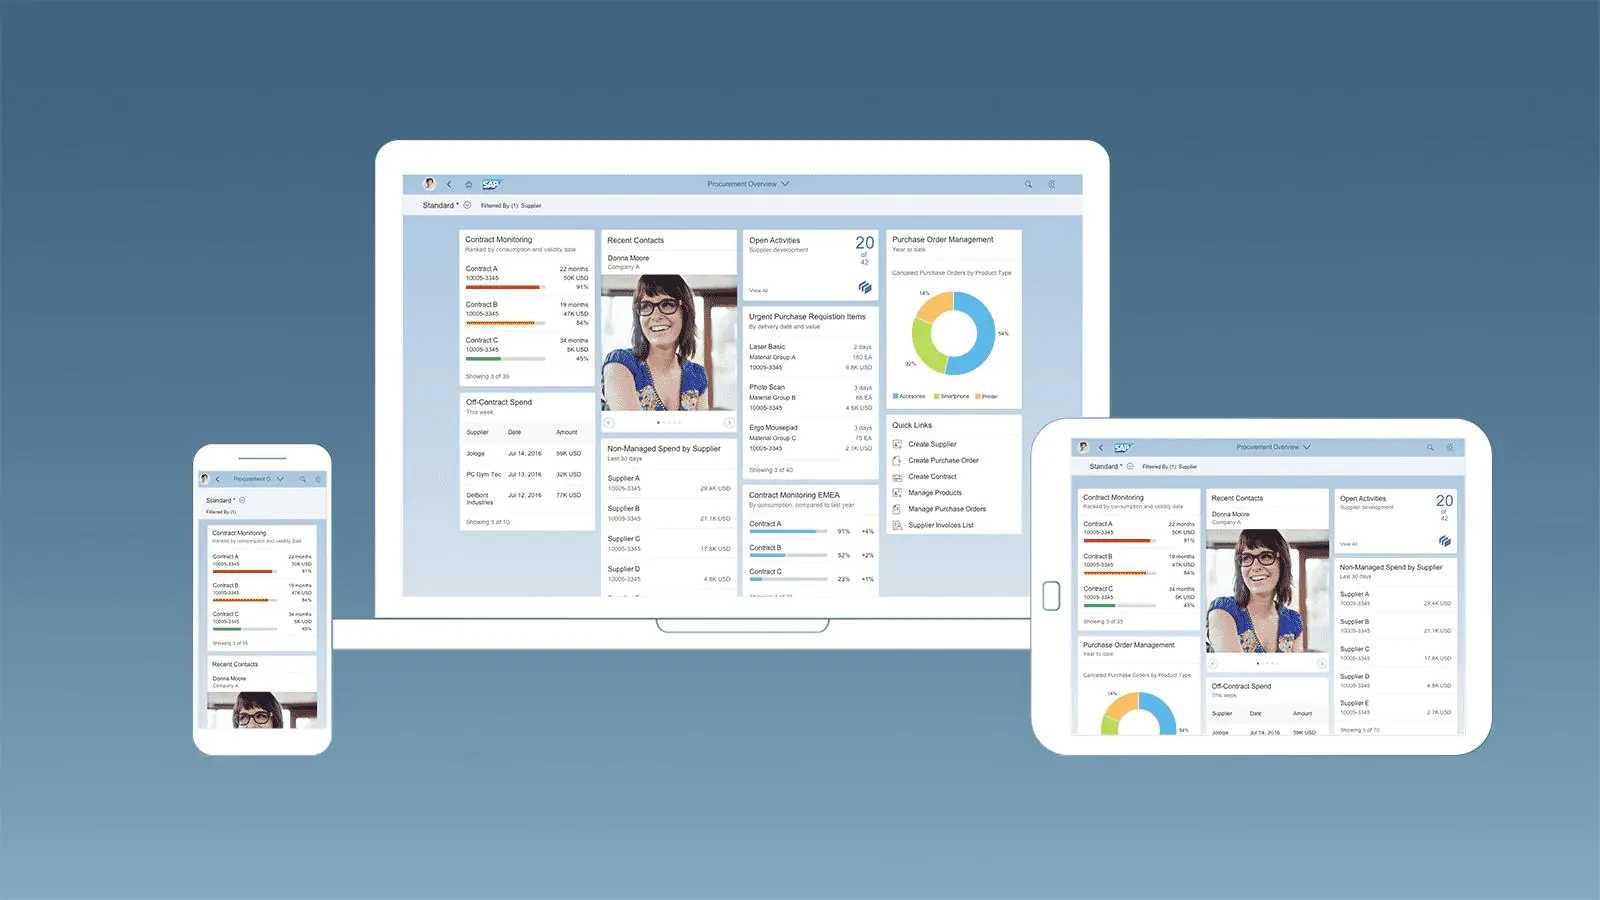 Simlified user experience with SAP Fiora set of tools